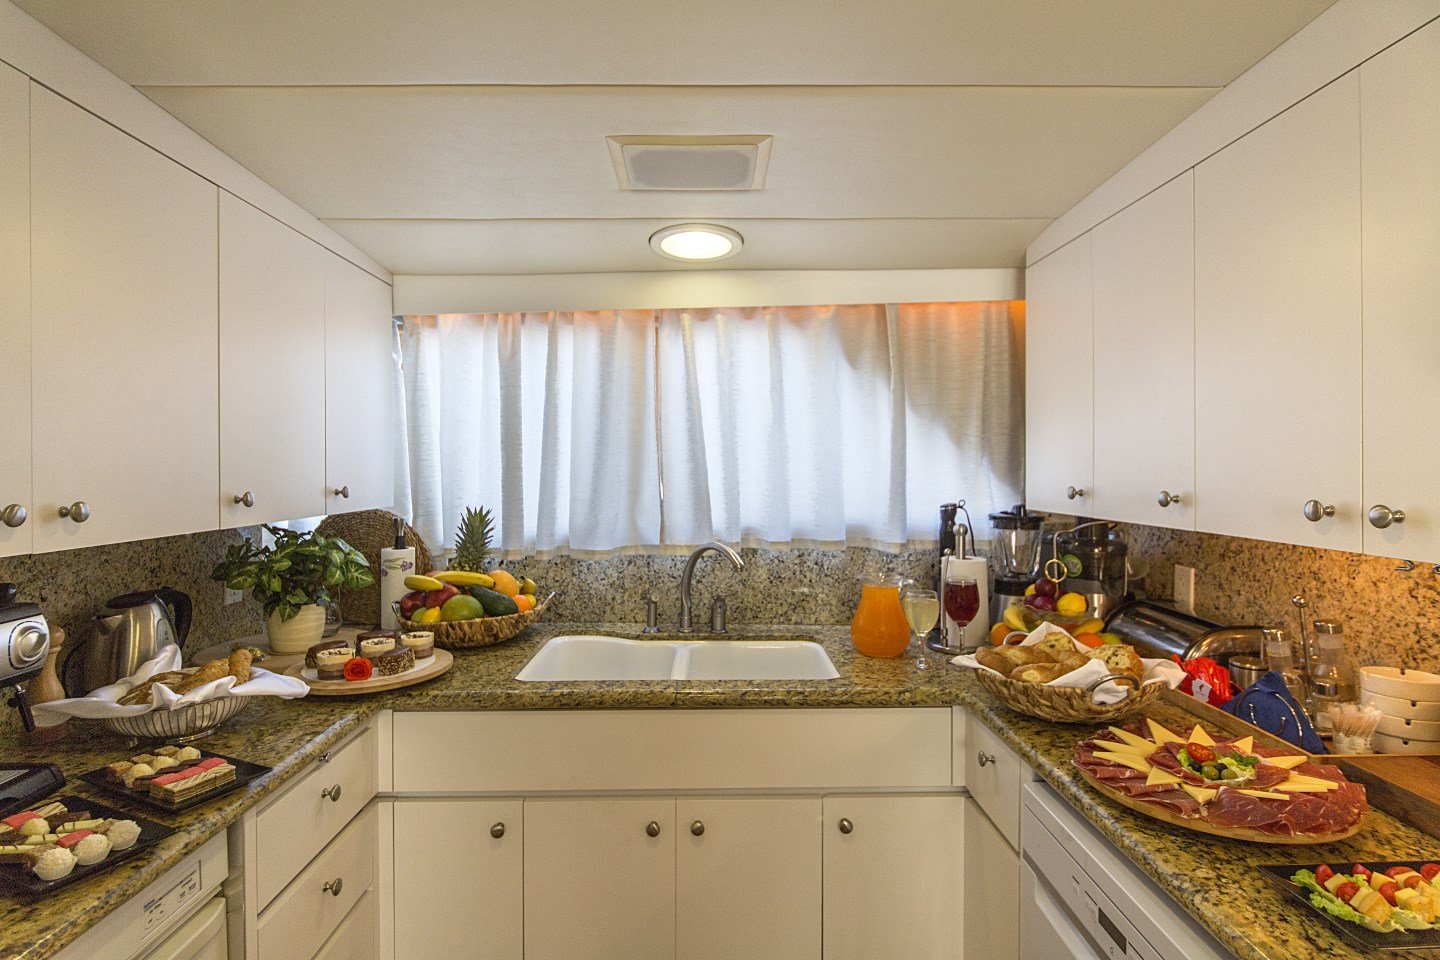 Outstanding food prepared in the galley